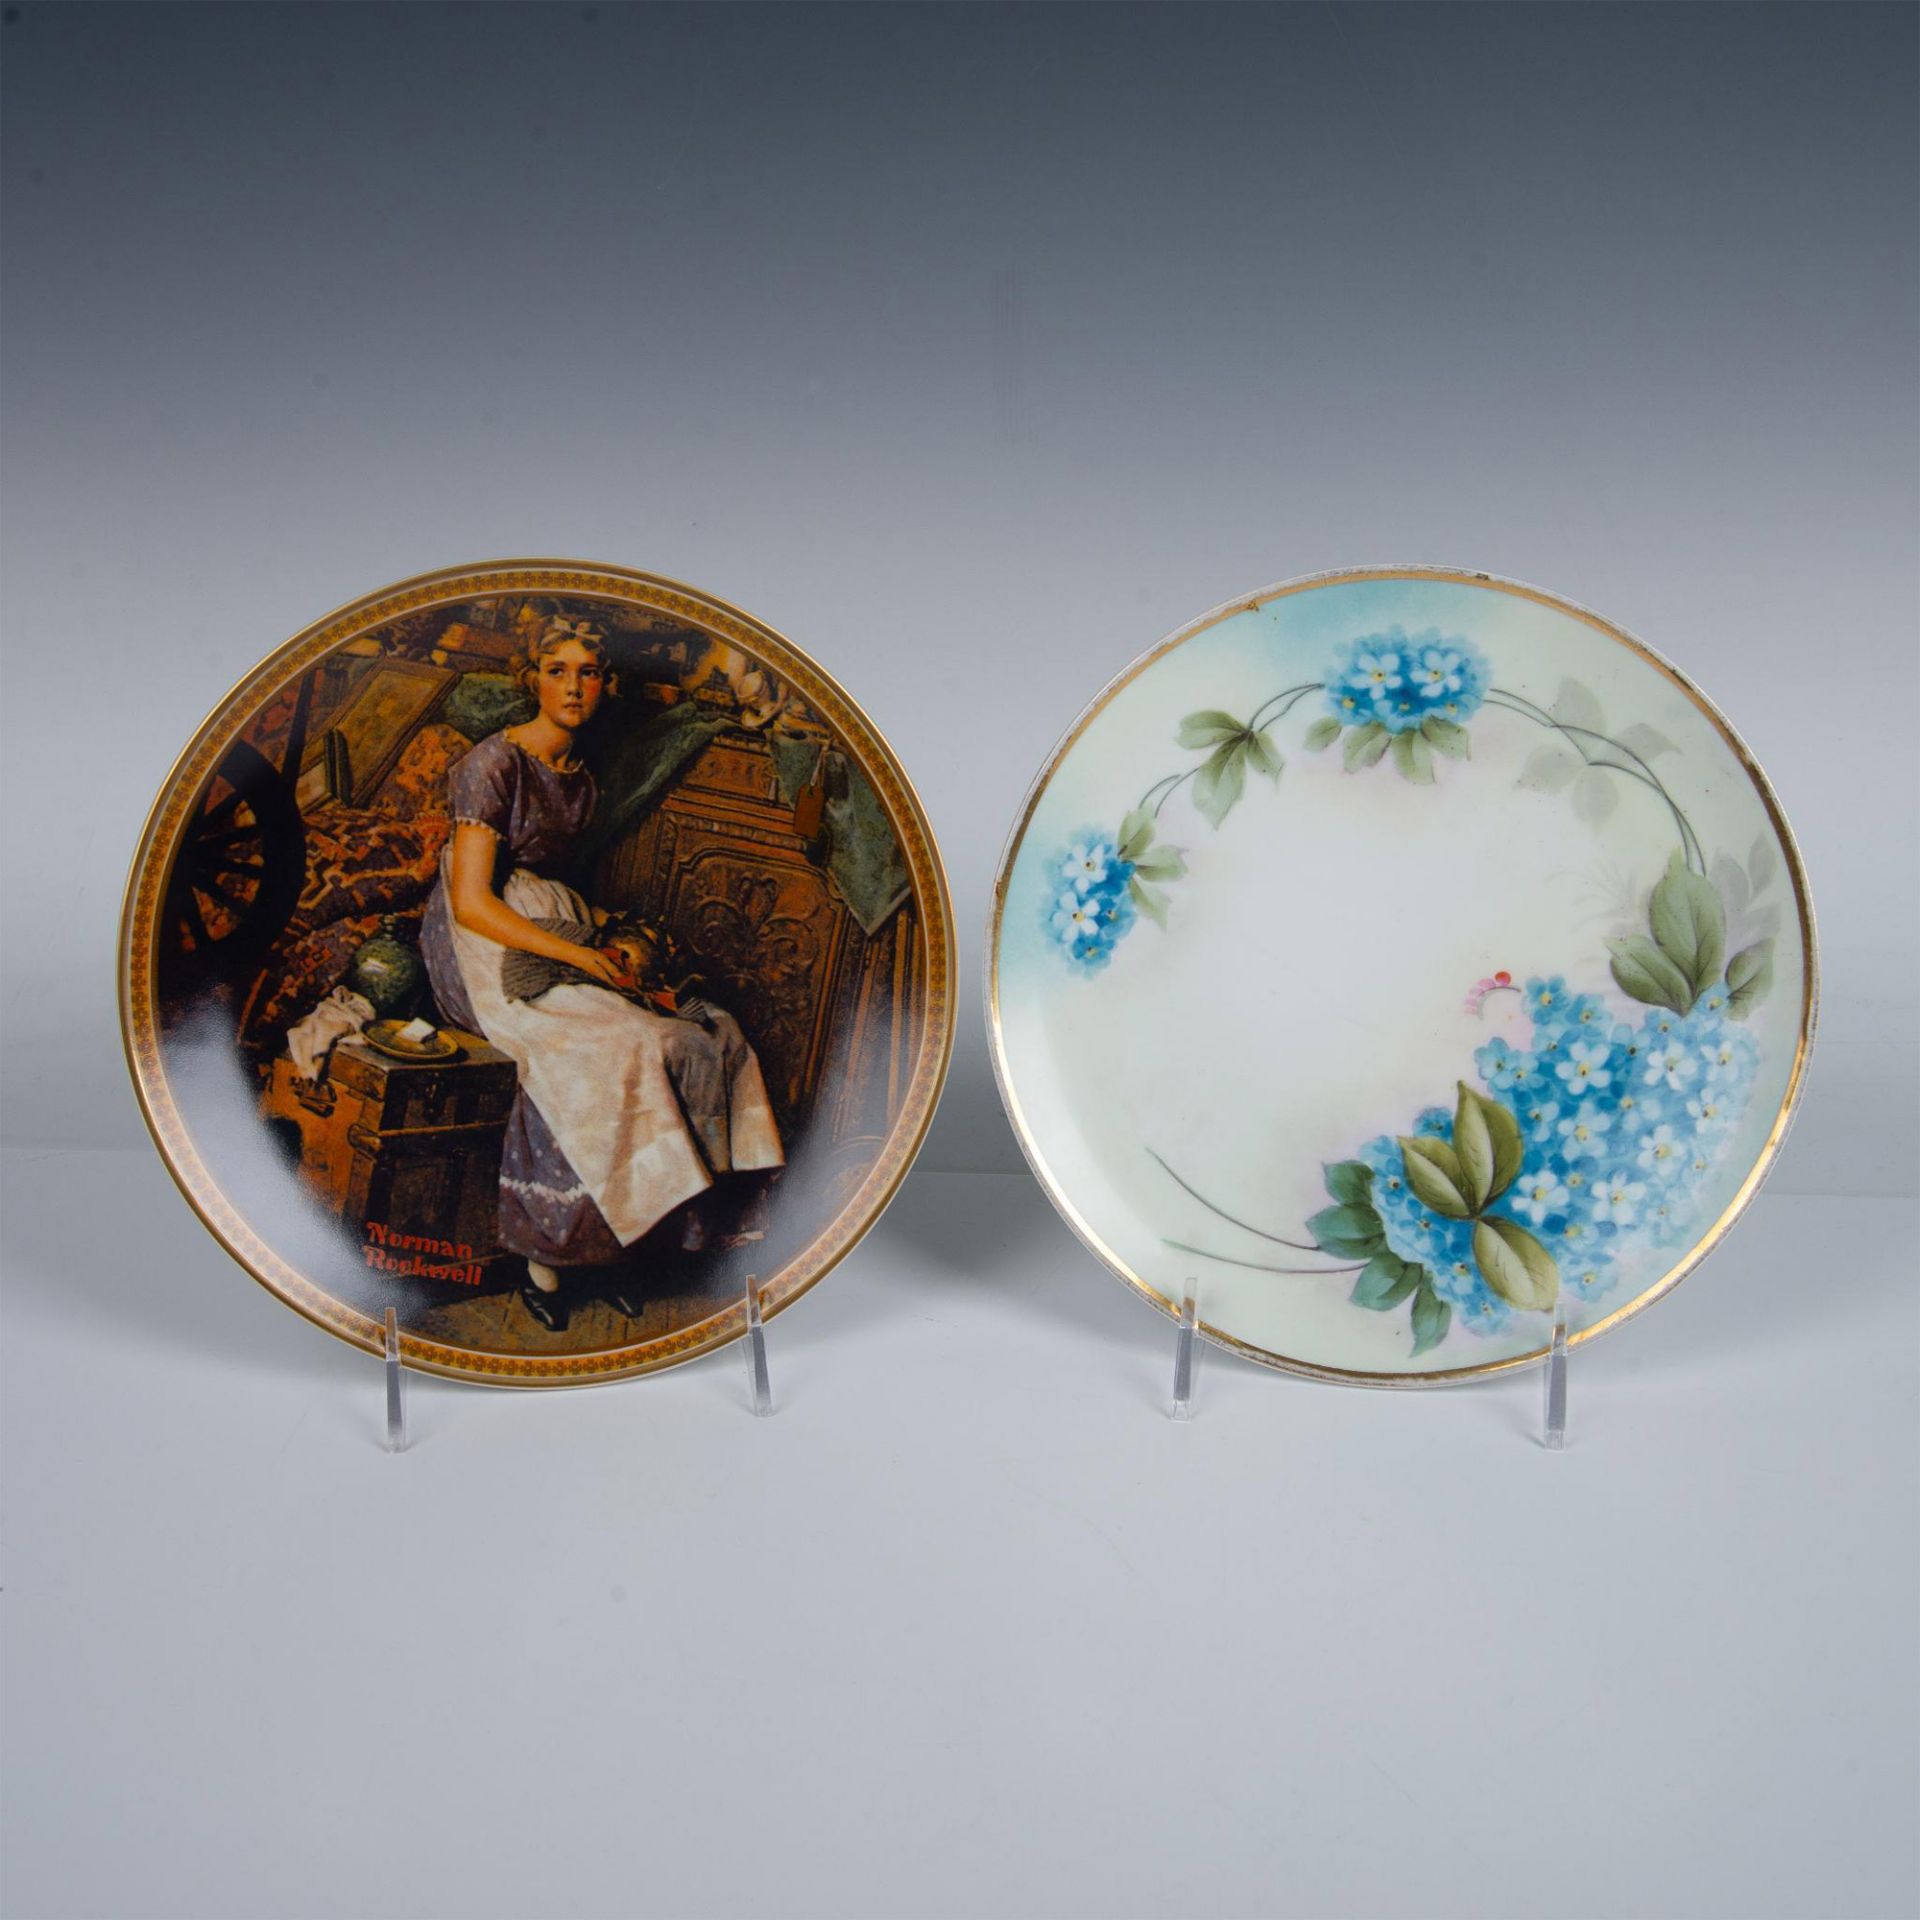 4pc Porcelain Plates, Knowles/Normal Rockwell, H&C/Flowers - Image 3 of 4